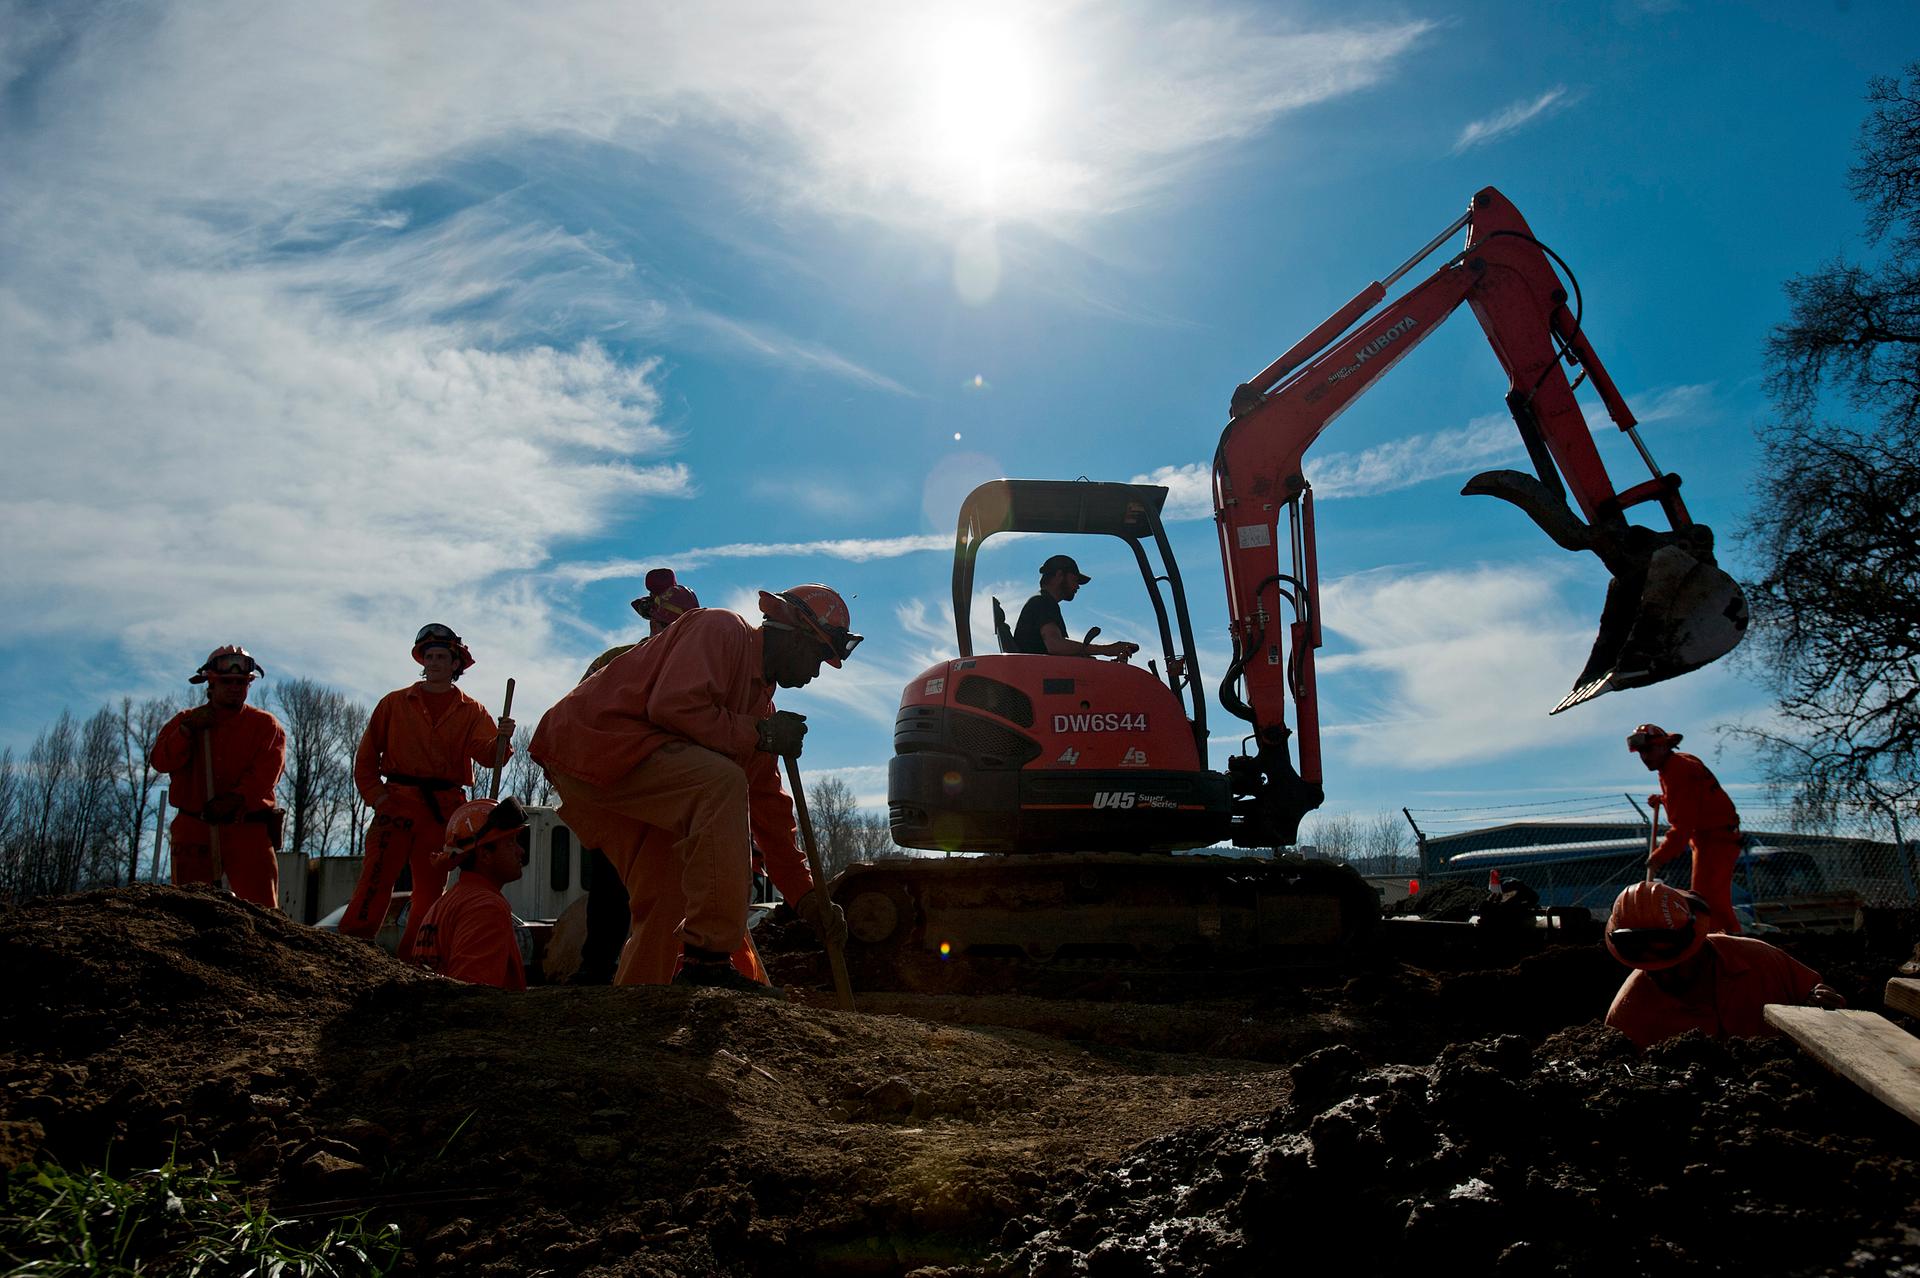 Prison laborers and an excavator operator help construct an emergency pipeline to increase supplies of potable water in Willits, California February 25, 2014.